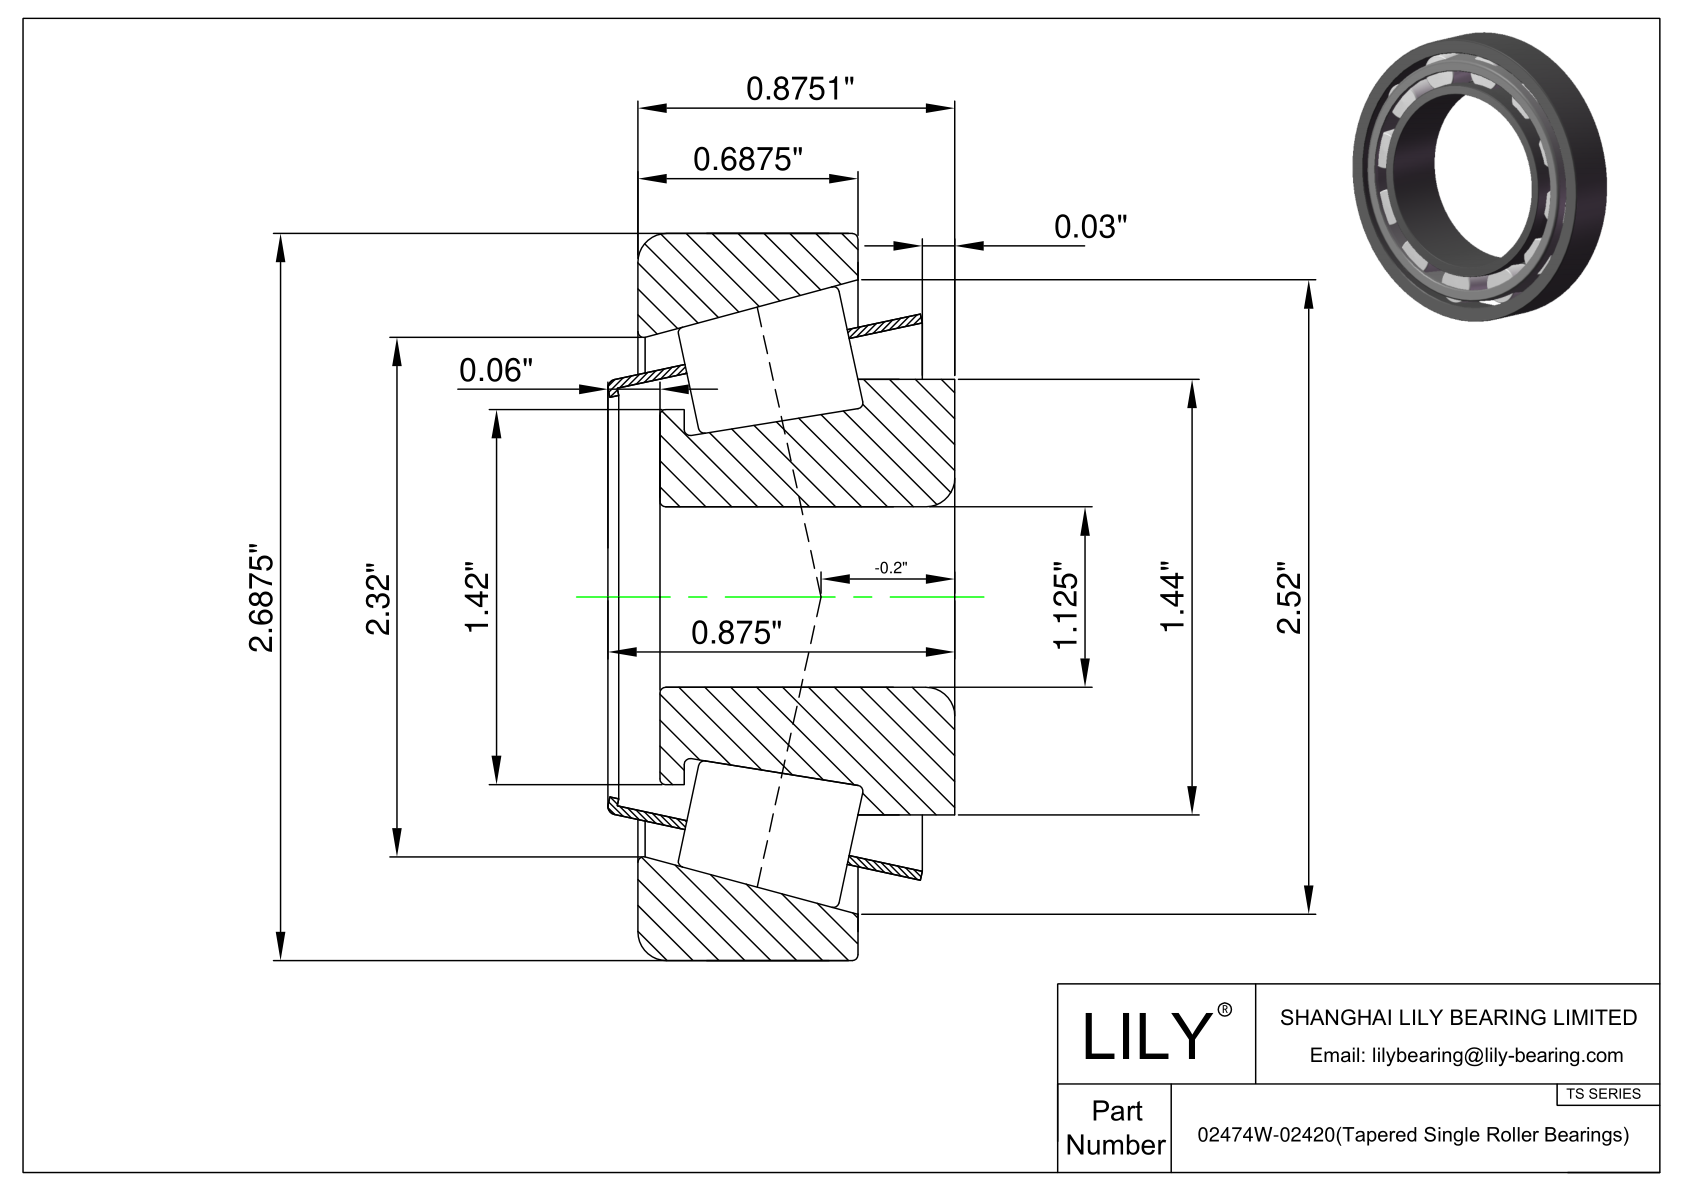 02474W-02420 TS (Tapered Single Roller Bearings) (Imperial) cad drawing